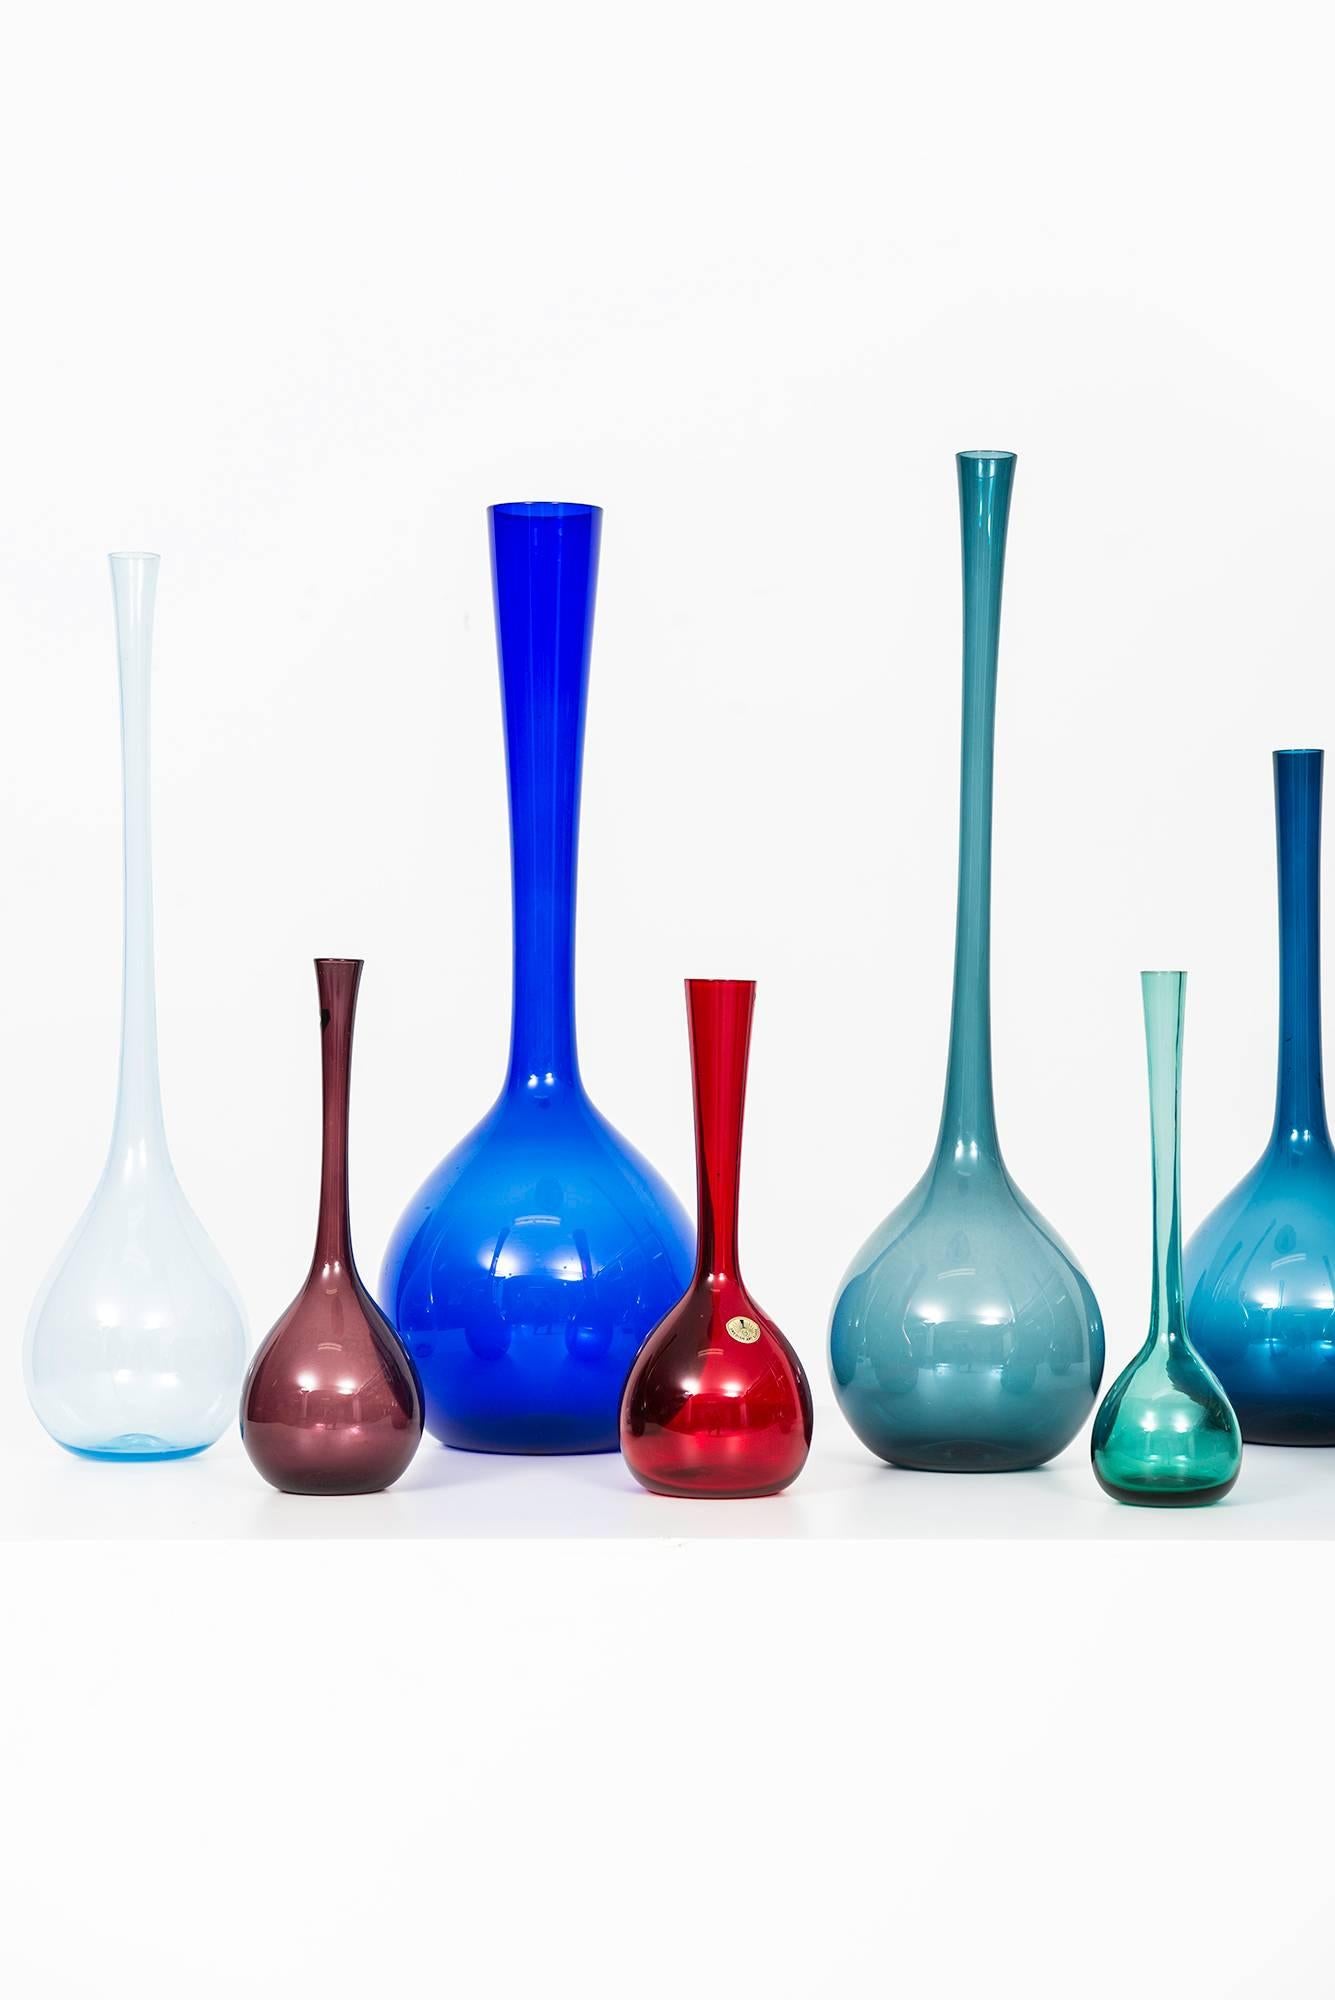 A set of eight-glass vases designed by Arthur Percy. Produced by Gullaskruf in Sweden. Height is between 24.5 - 52 cm.